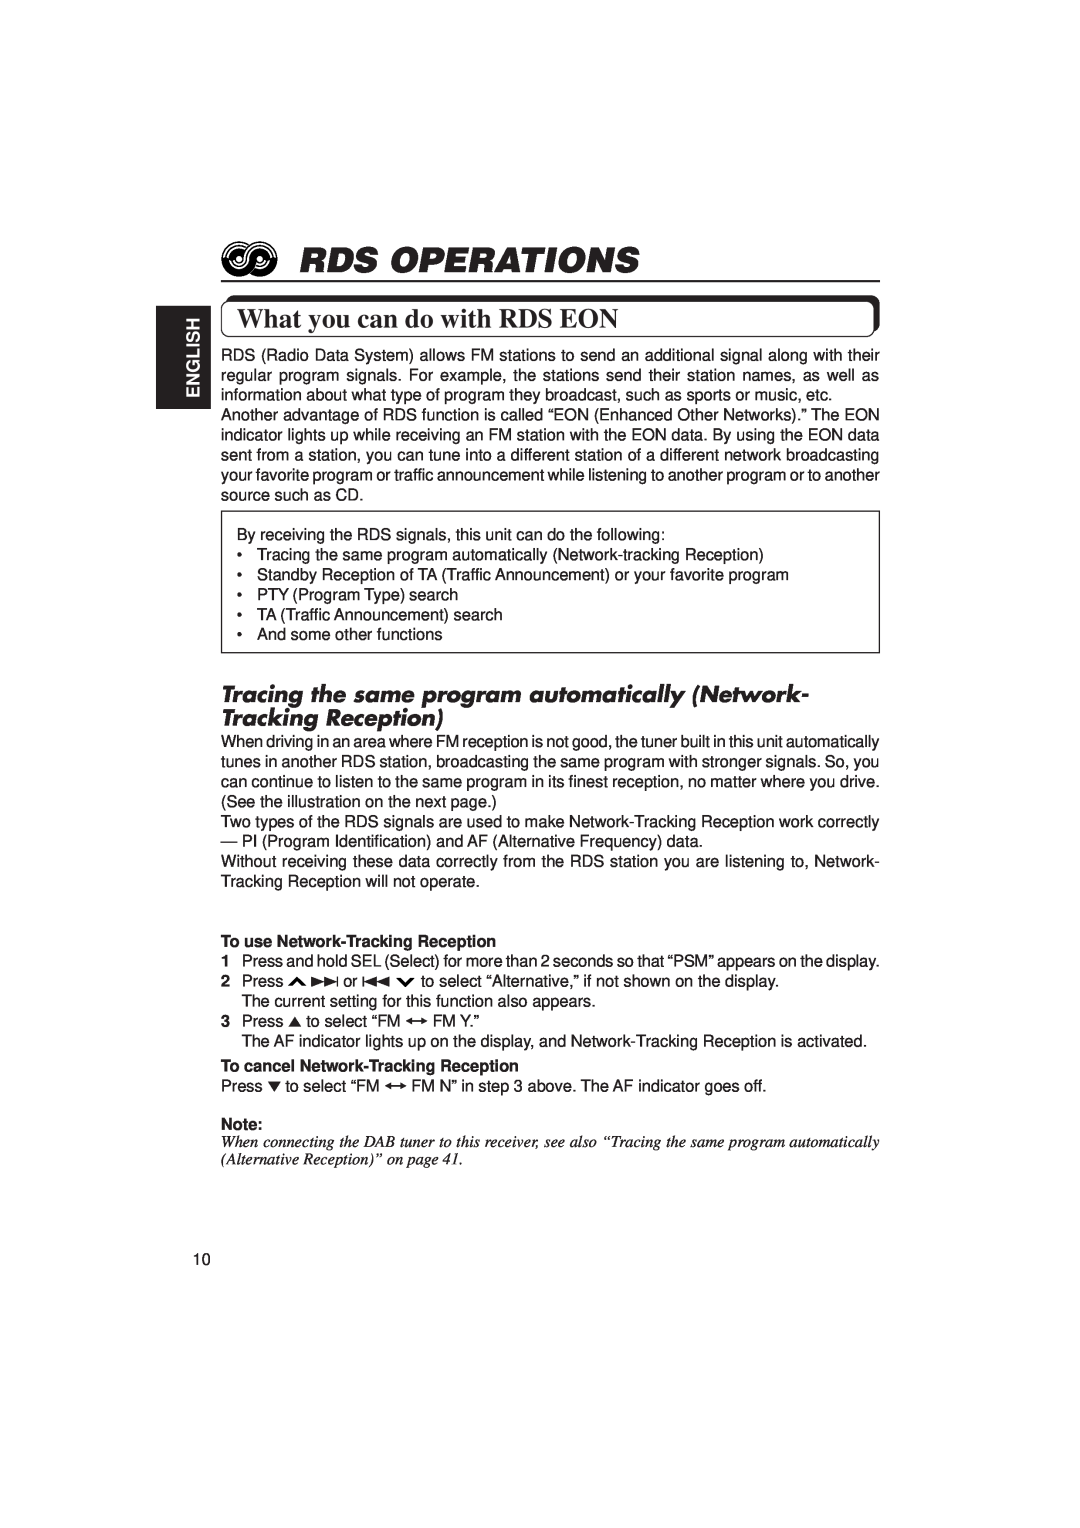 JVC KD-SX1500R manual Rds Operations, What you can do with RDS EON, English 